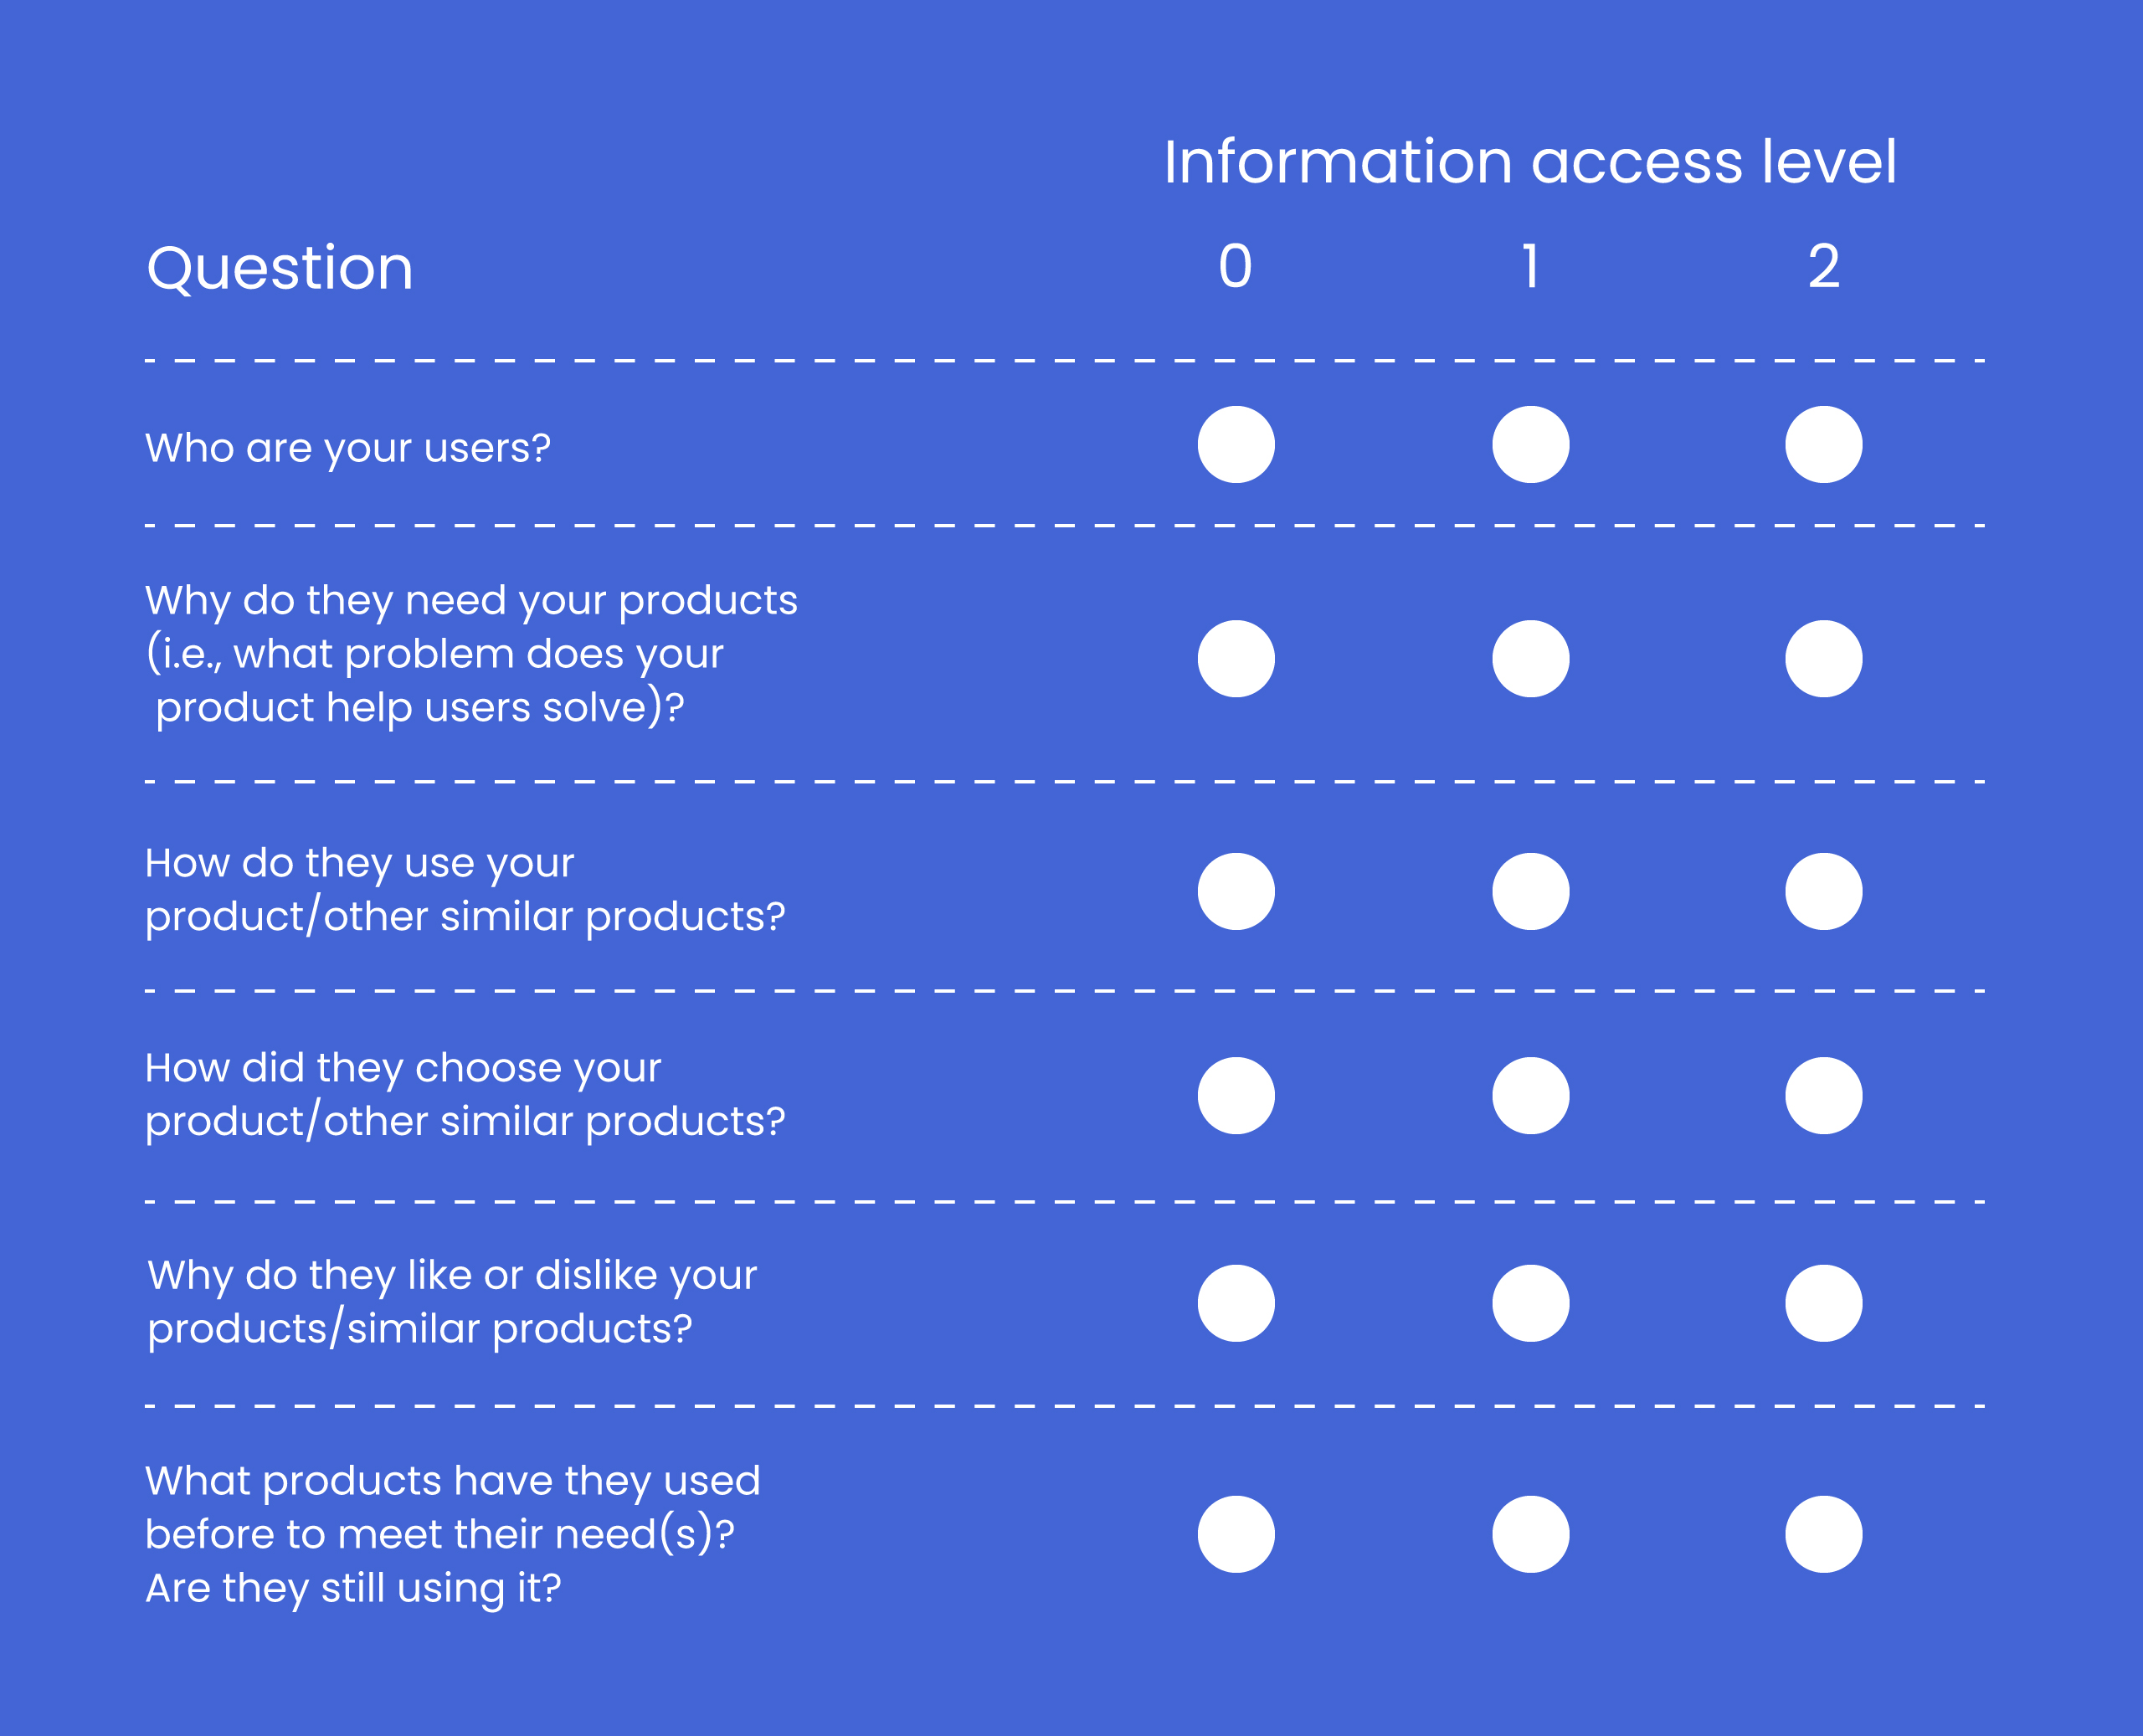 Rating the levelf of information access